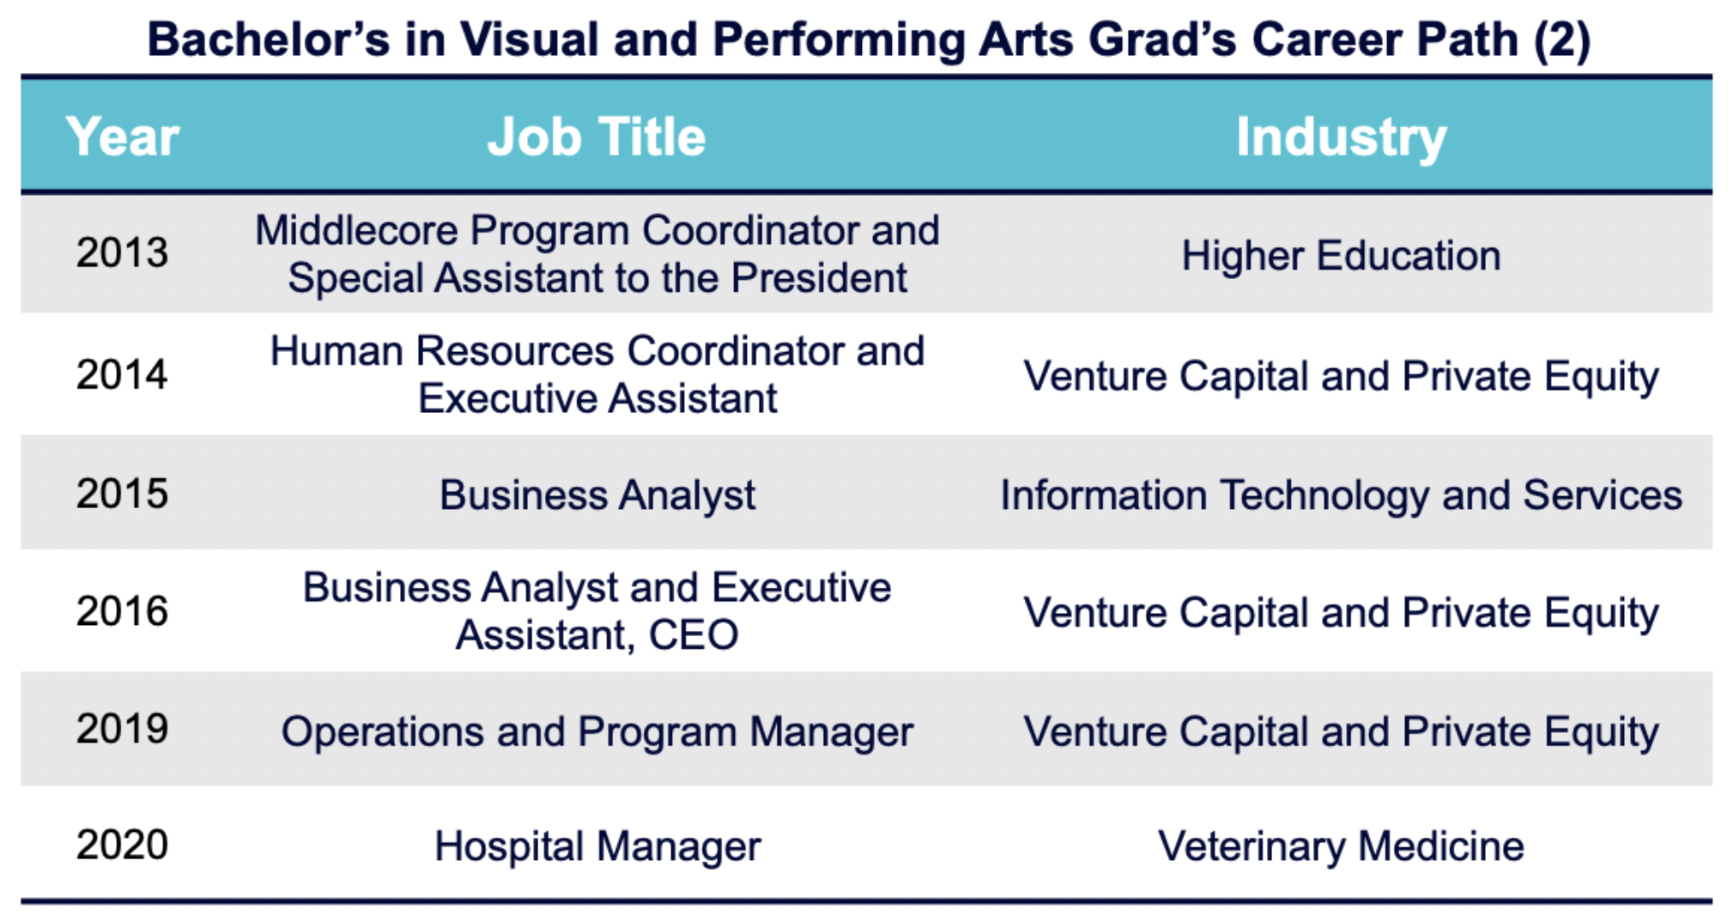 Bachelor's in Visual and Performing Arts Grad's Career Path (2) 